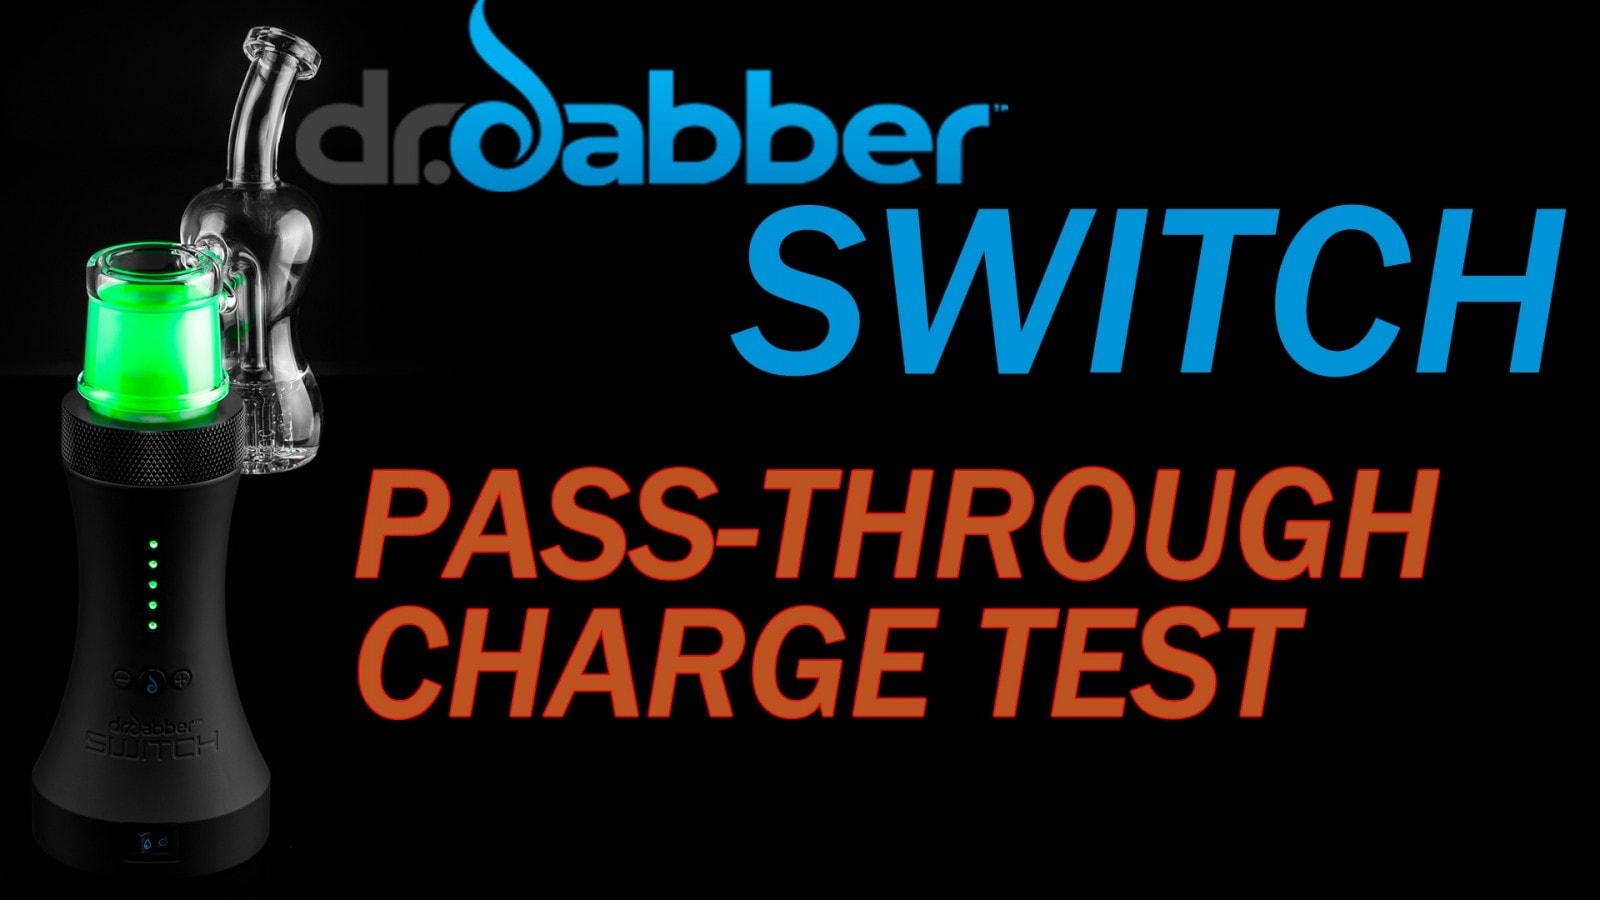 Dr. Dabber Switch Pass-through Charging Test